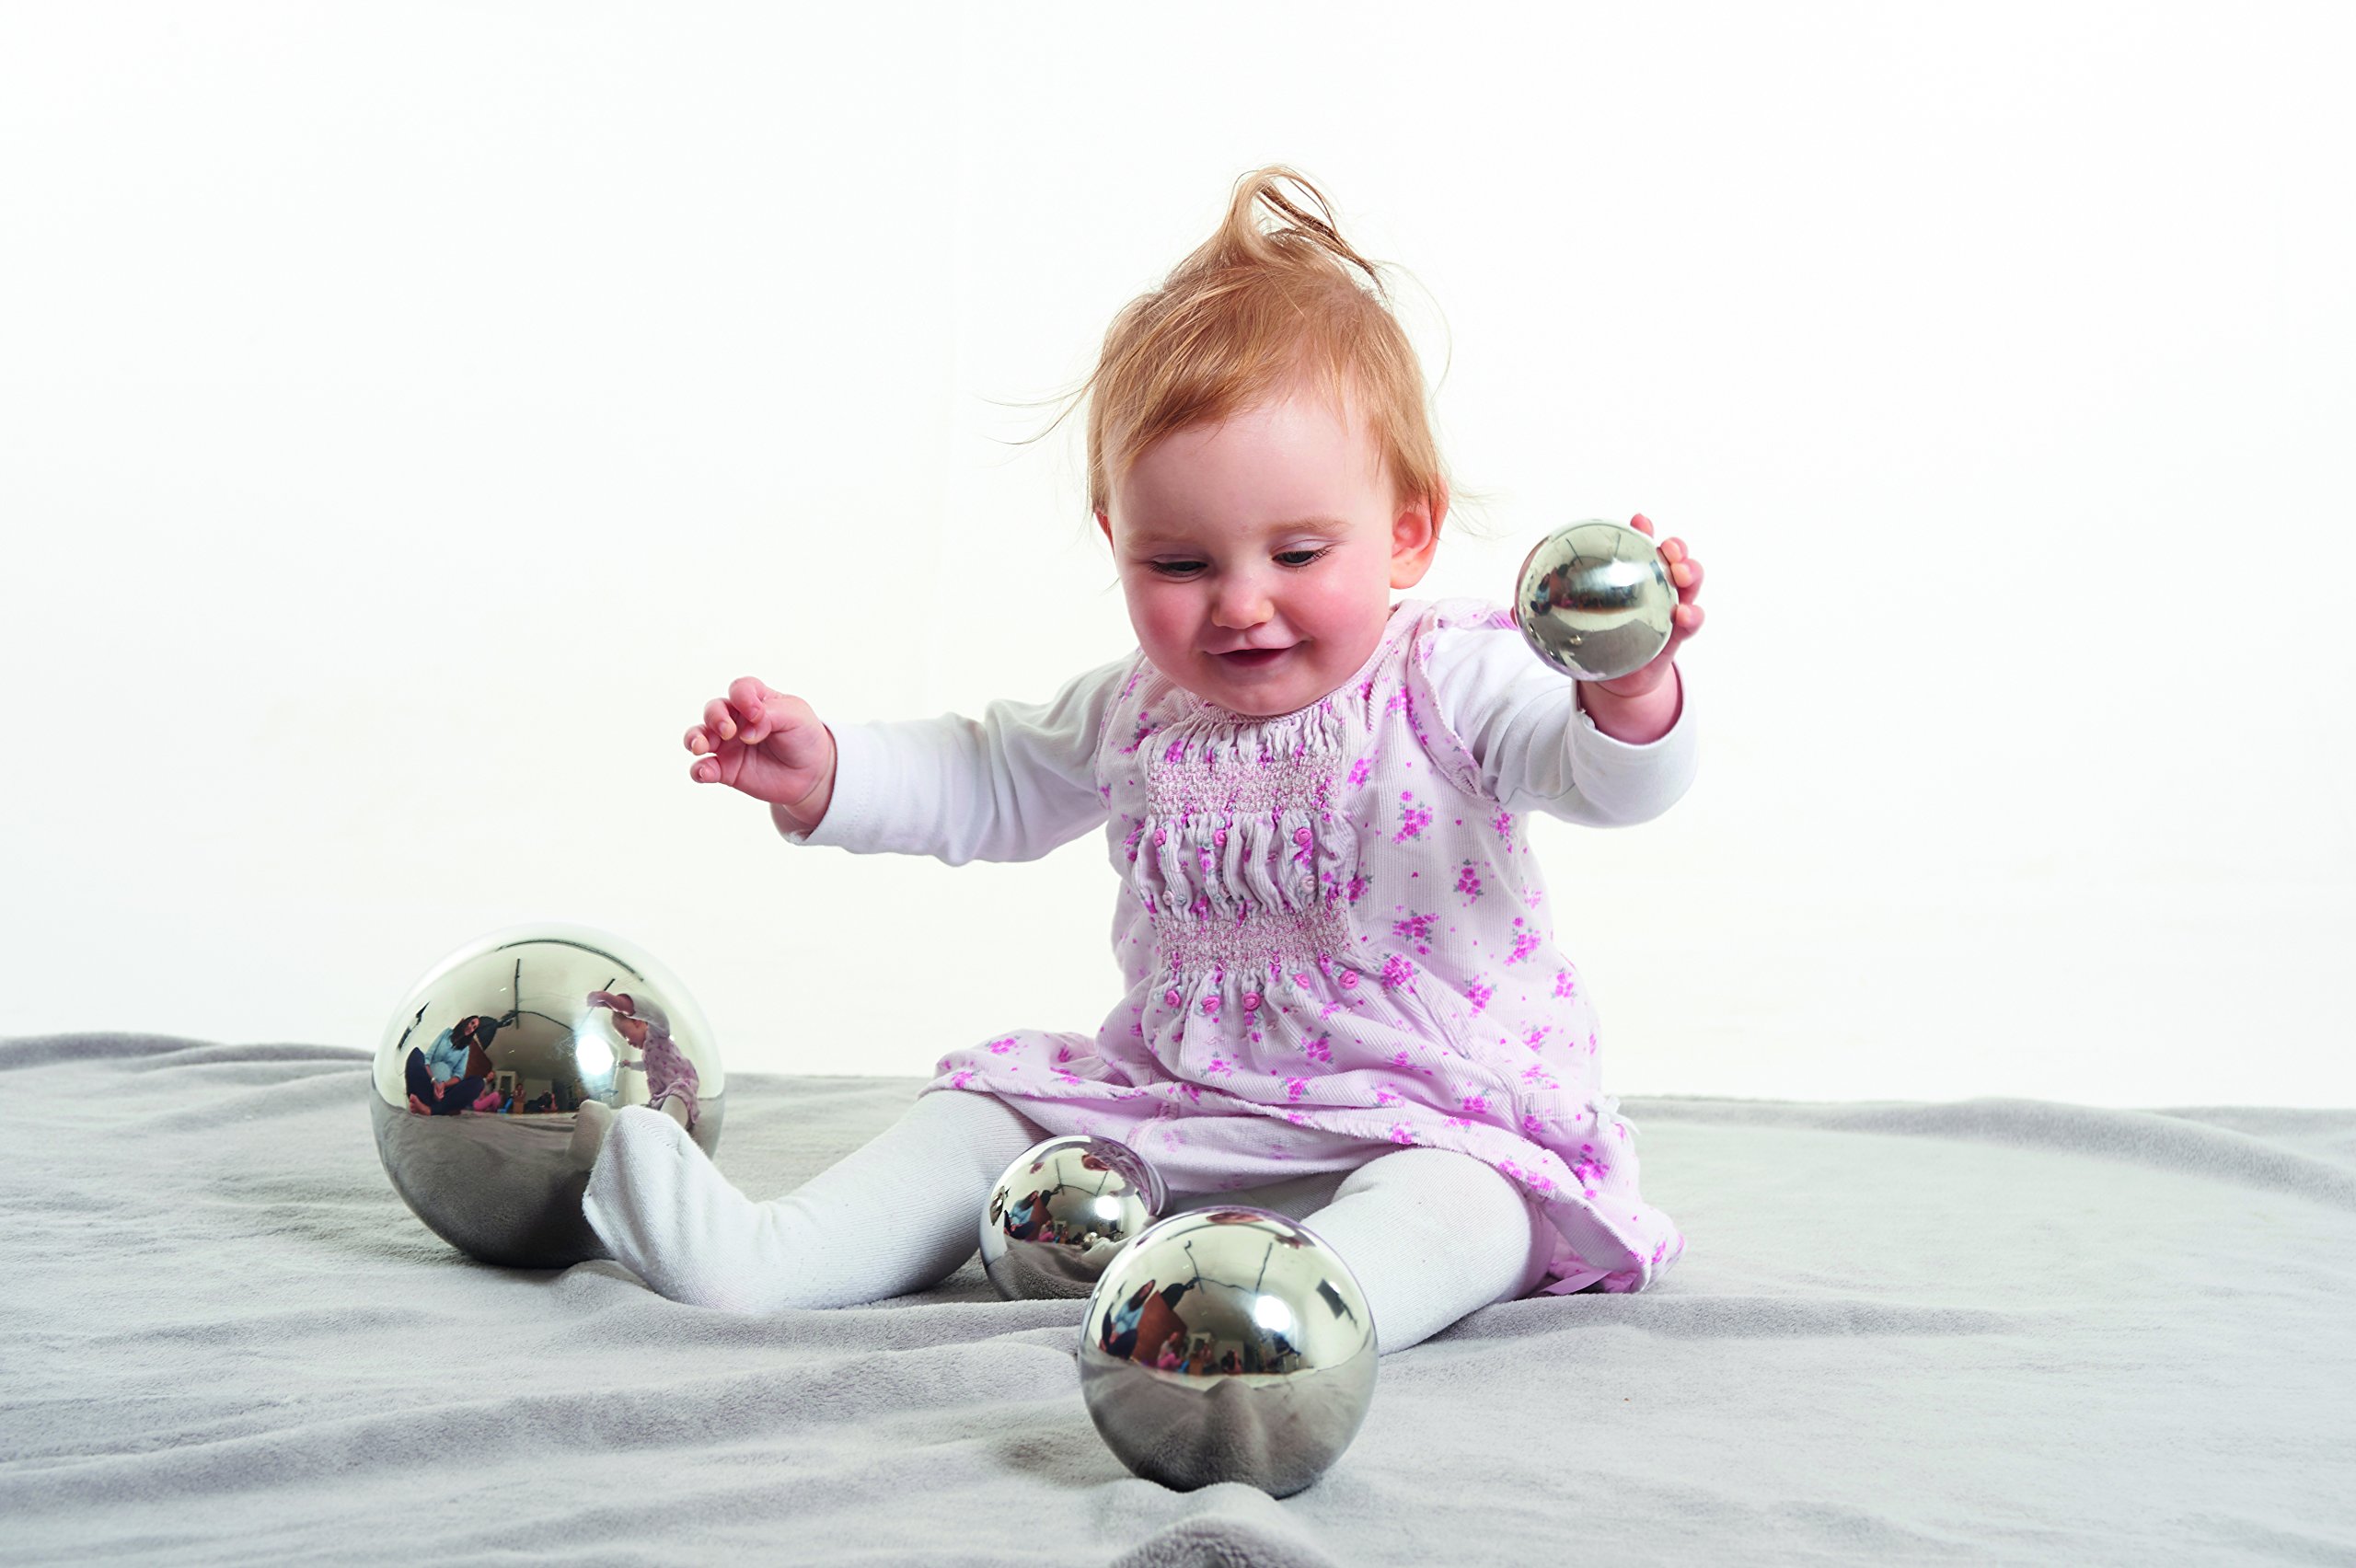 TickiT - 9322 Sensory Reflective Balls - Set of 4 - Mirrored Spheres for Babies and Toddlers - Stainless Steel Sensory Balls for Reflections and Color - For Stylish Nurseries and Bedrooms